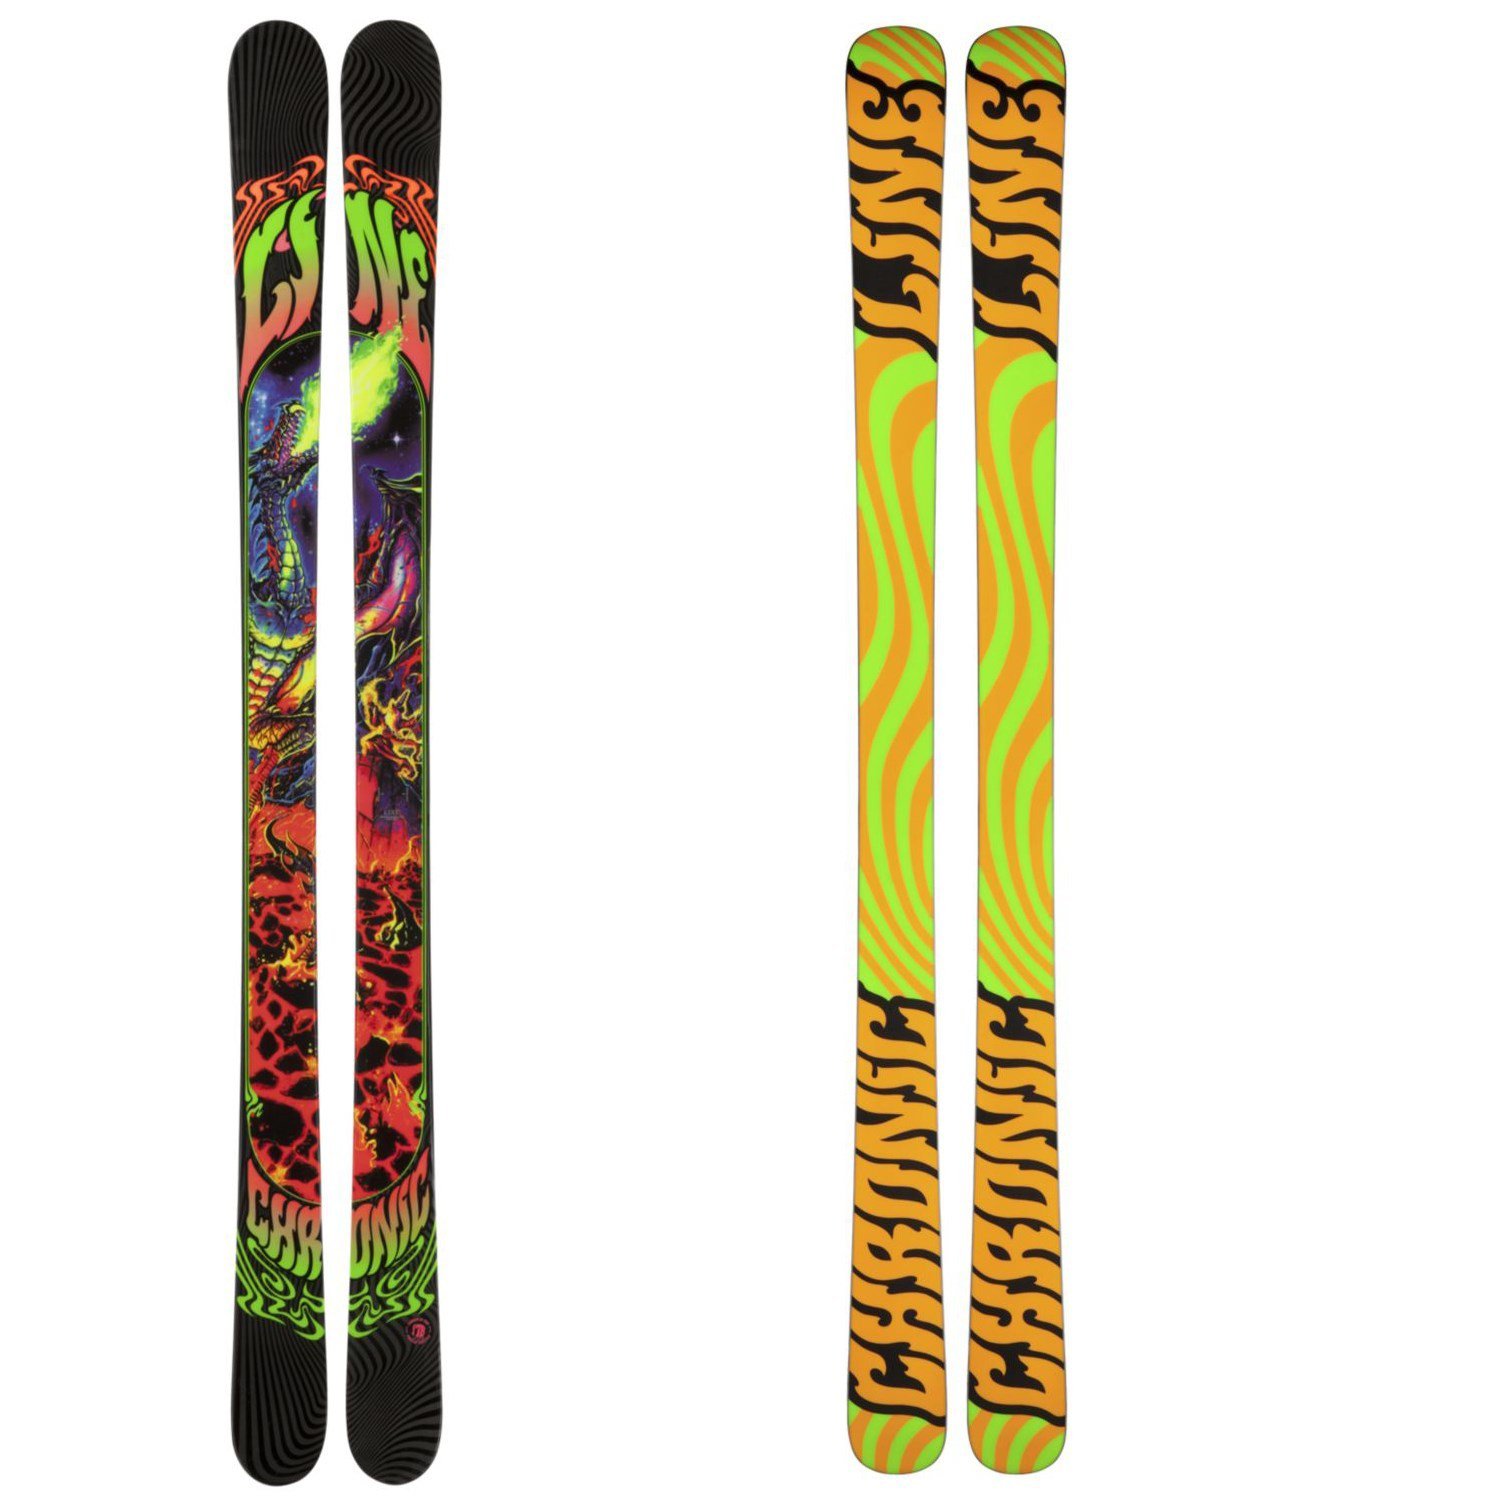 Just bought some new skis!